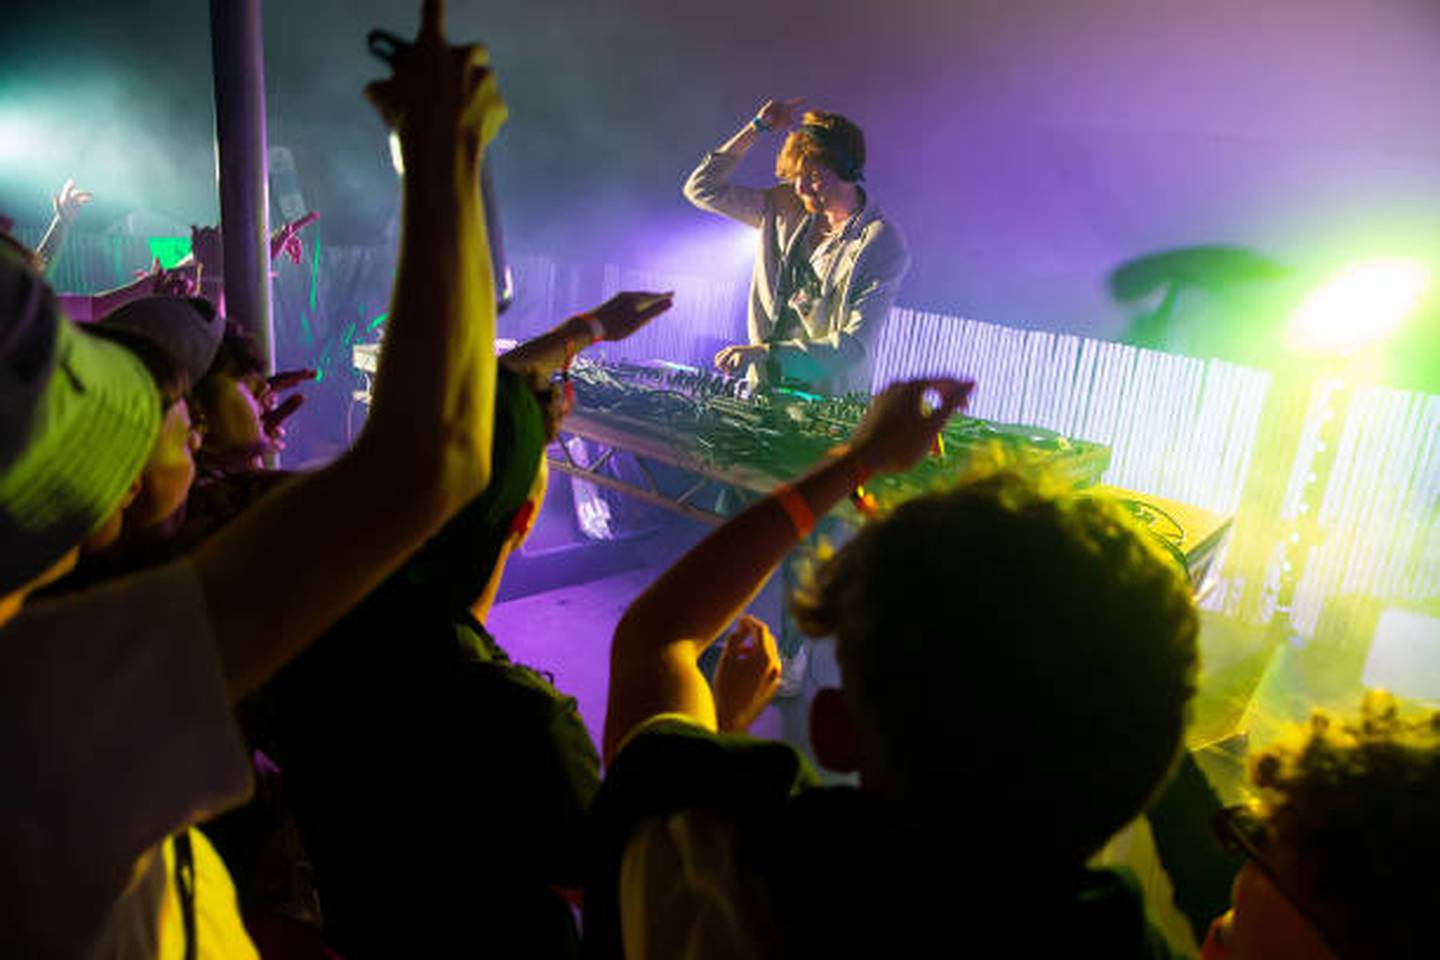 A DJ performs during the Boardmasters festival in Newquay, England. Getty Images